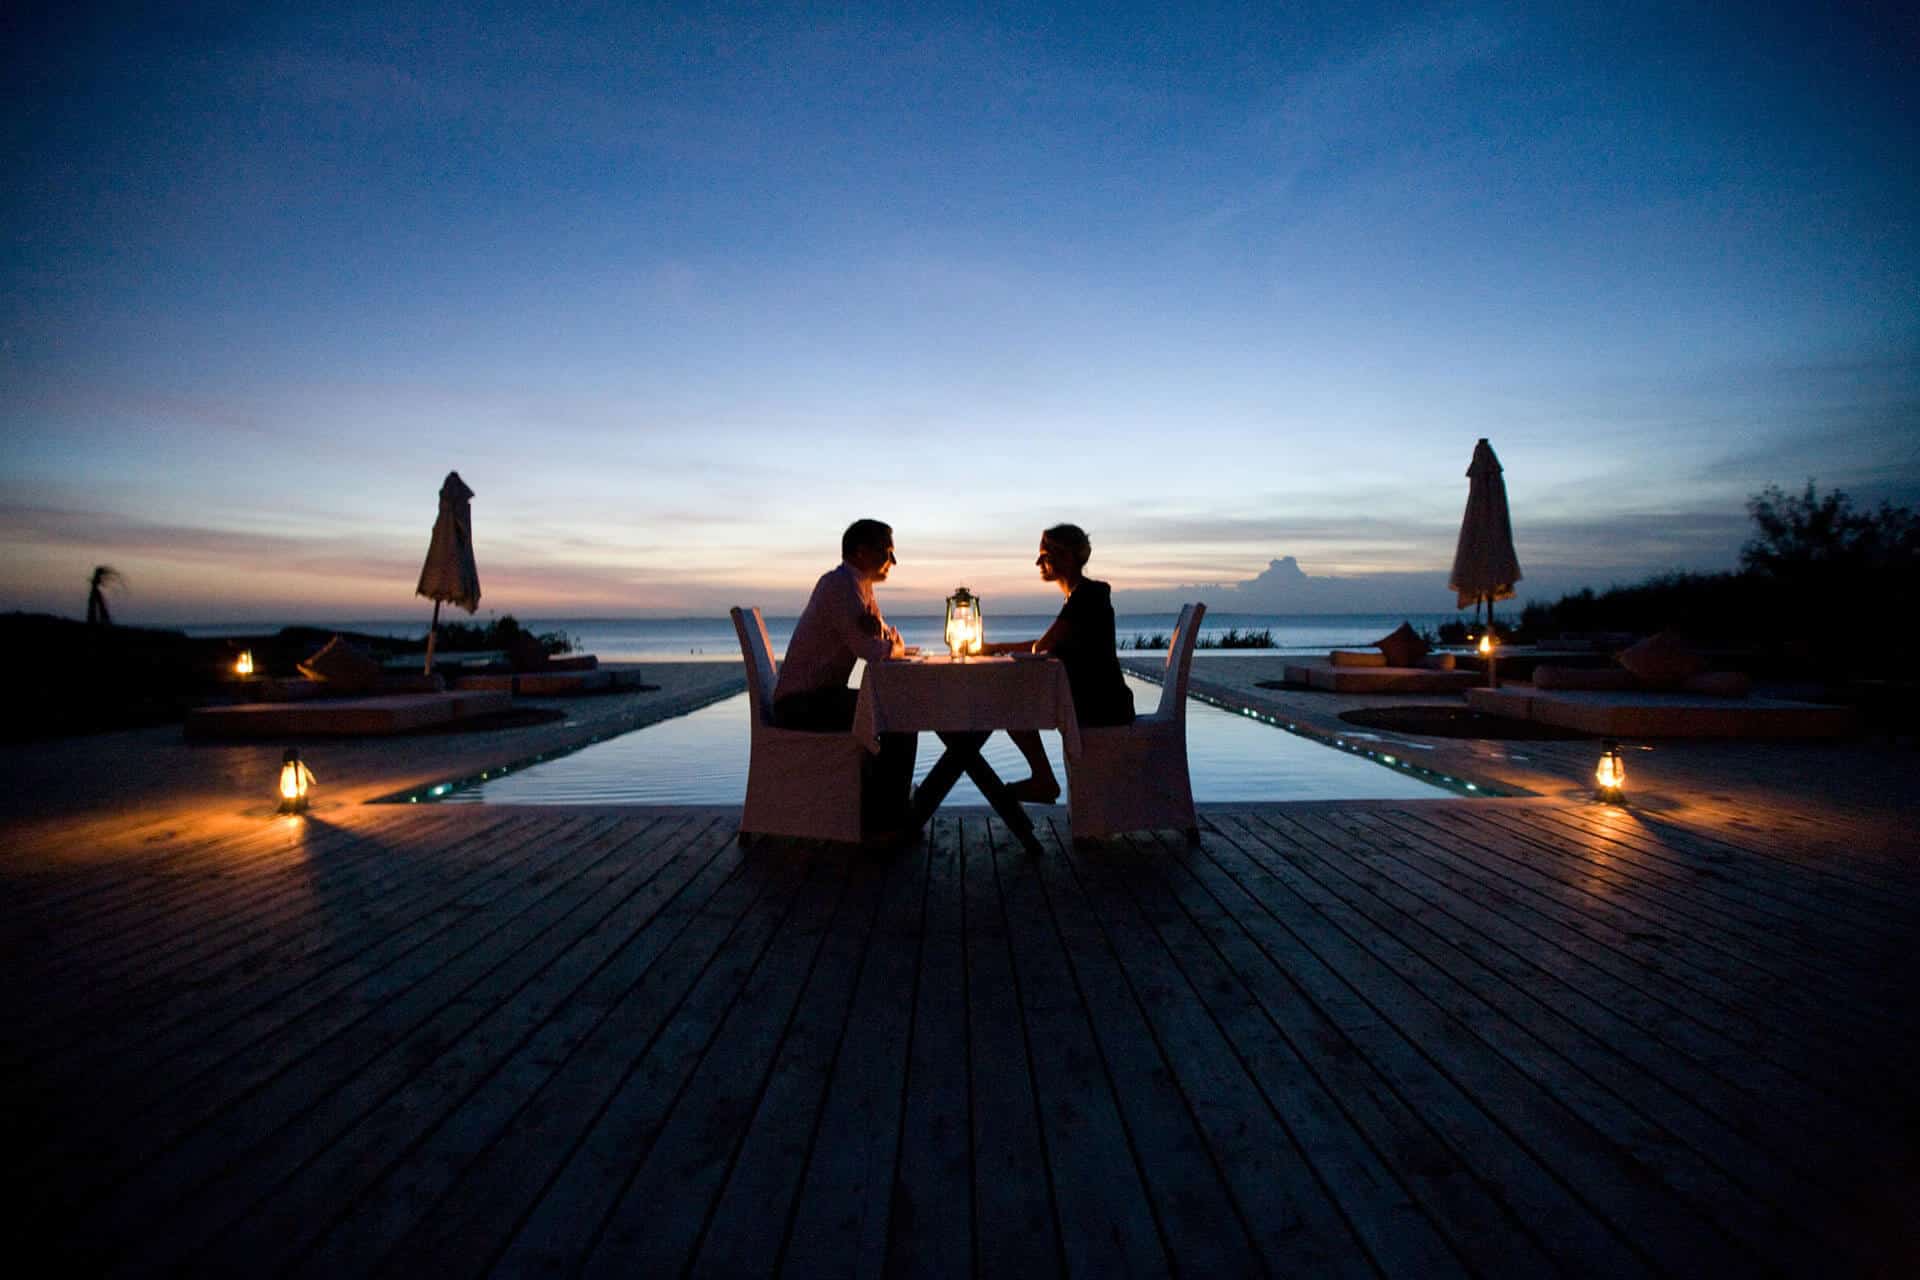 Al fresco dining in Zanzibar, for one of the nights during your Christmas in East Africa